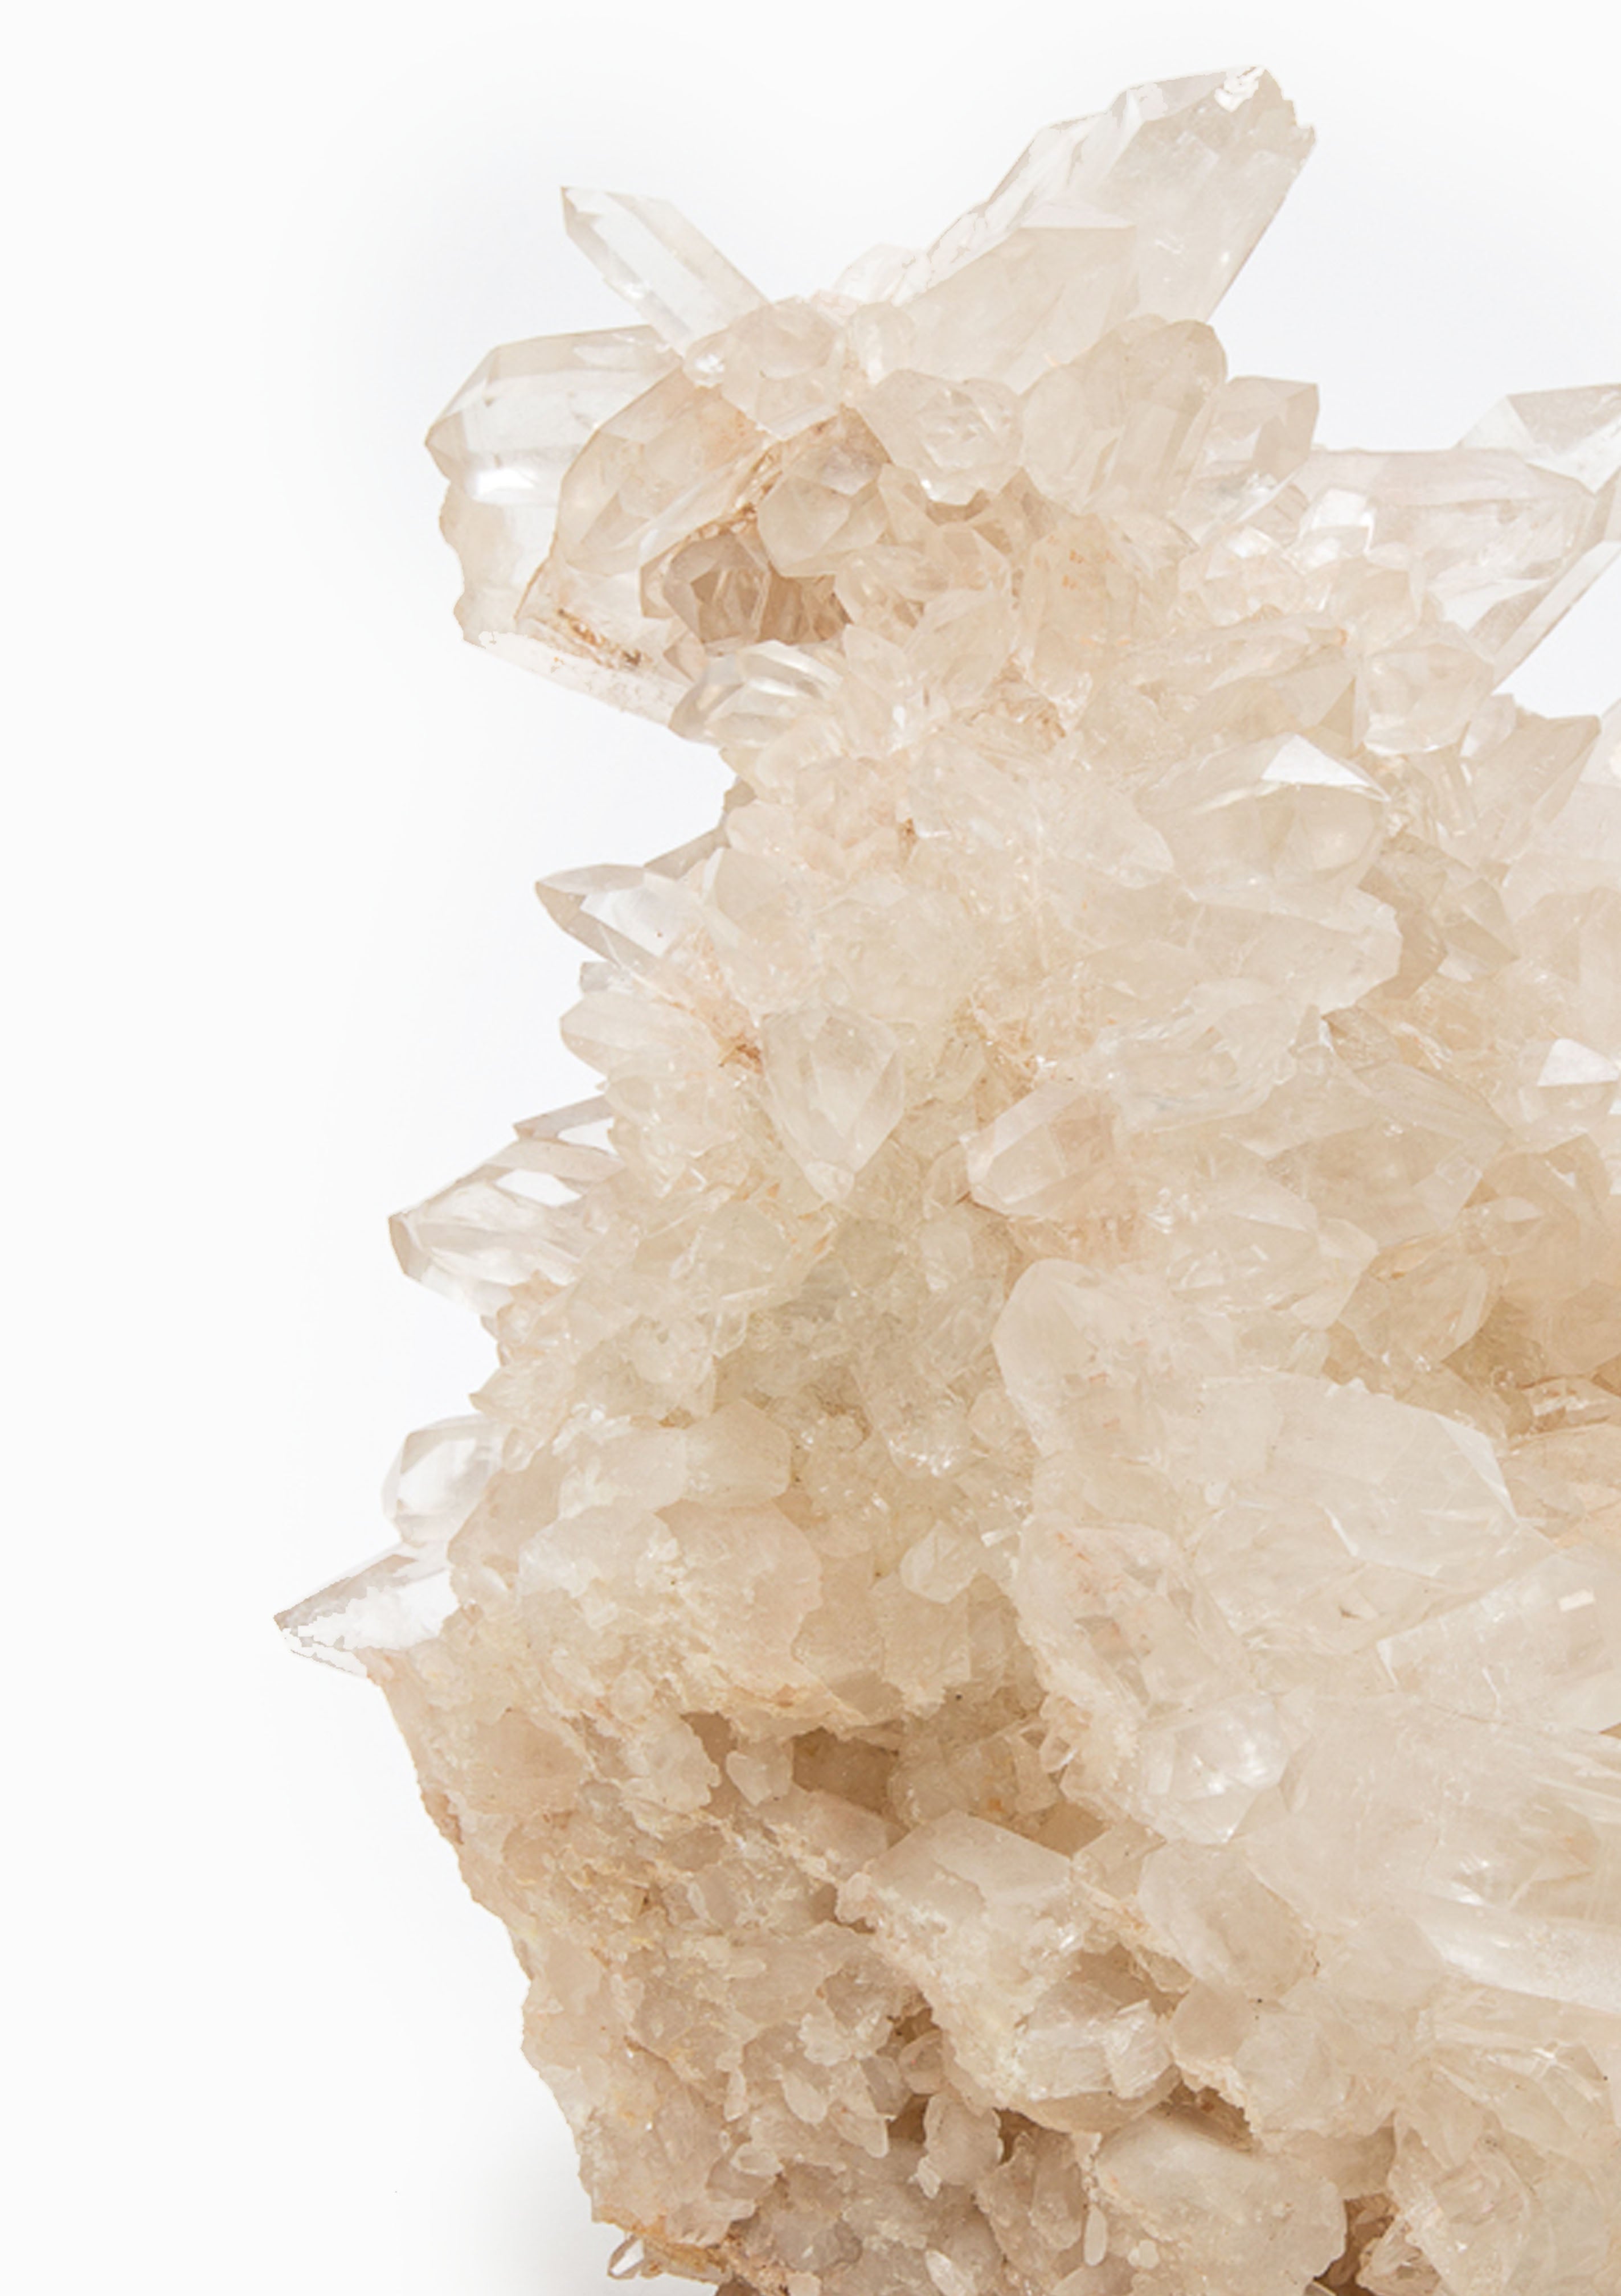 Himalayan Quartz Crystal 41 | Double Sided